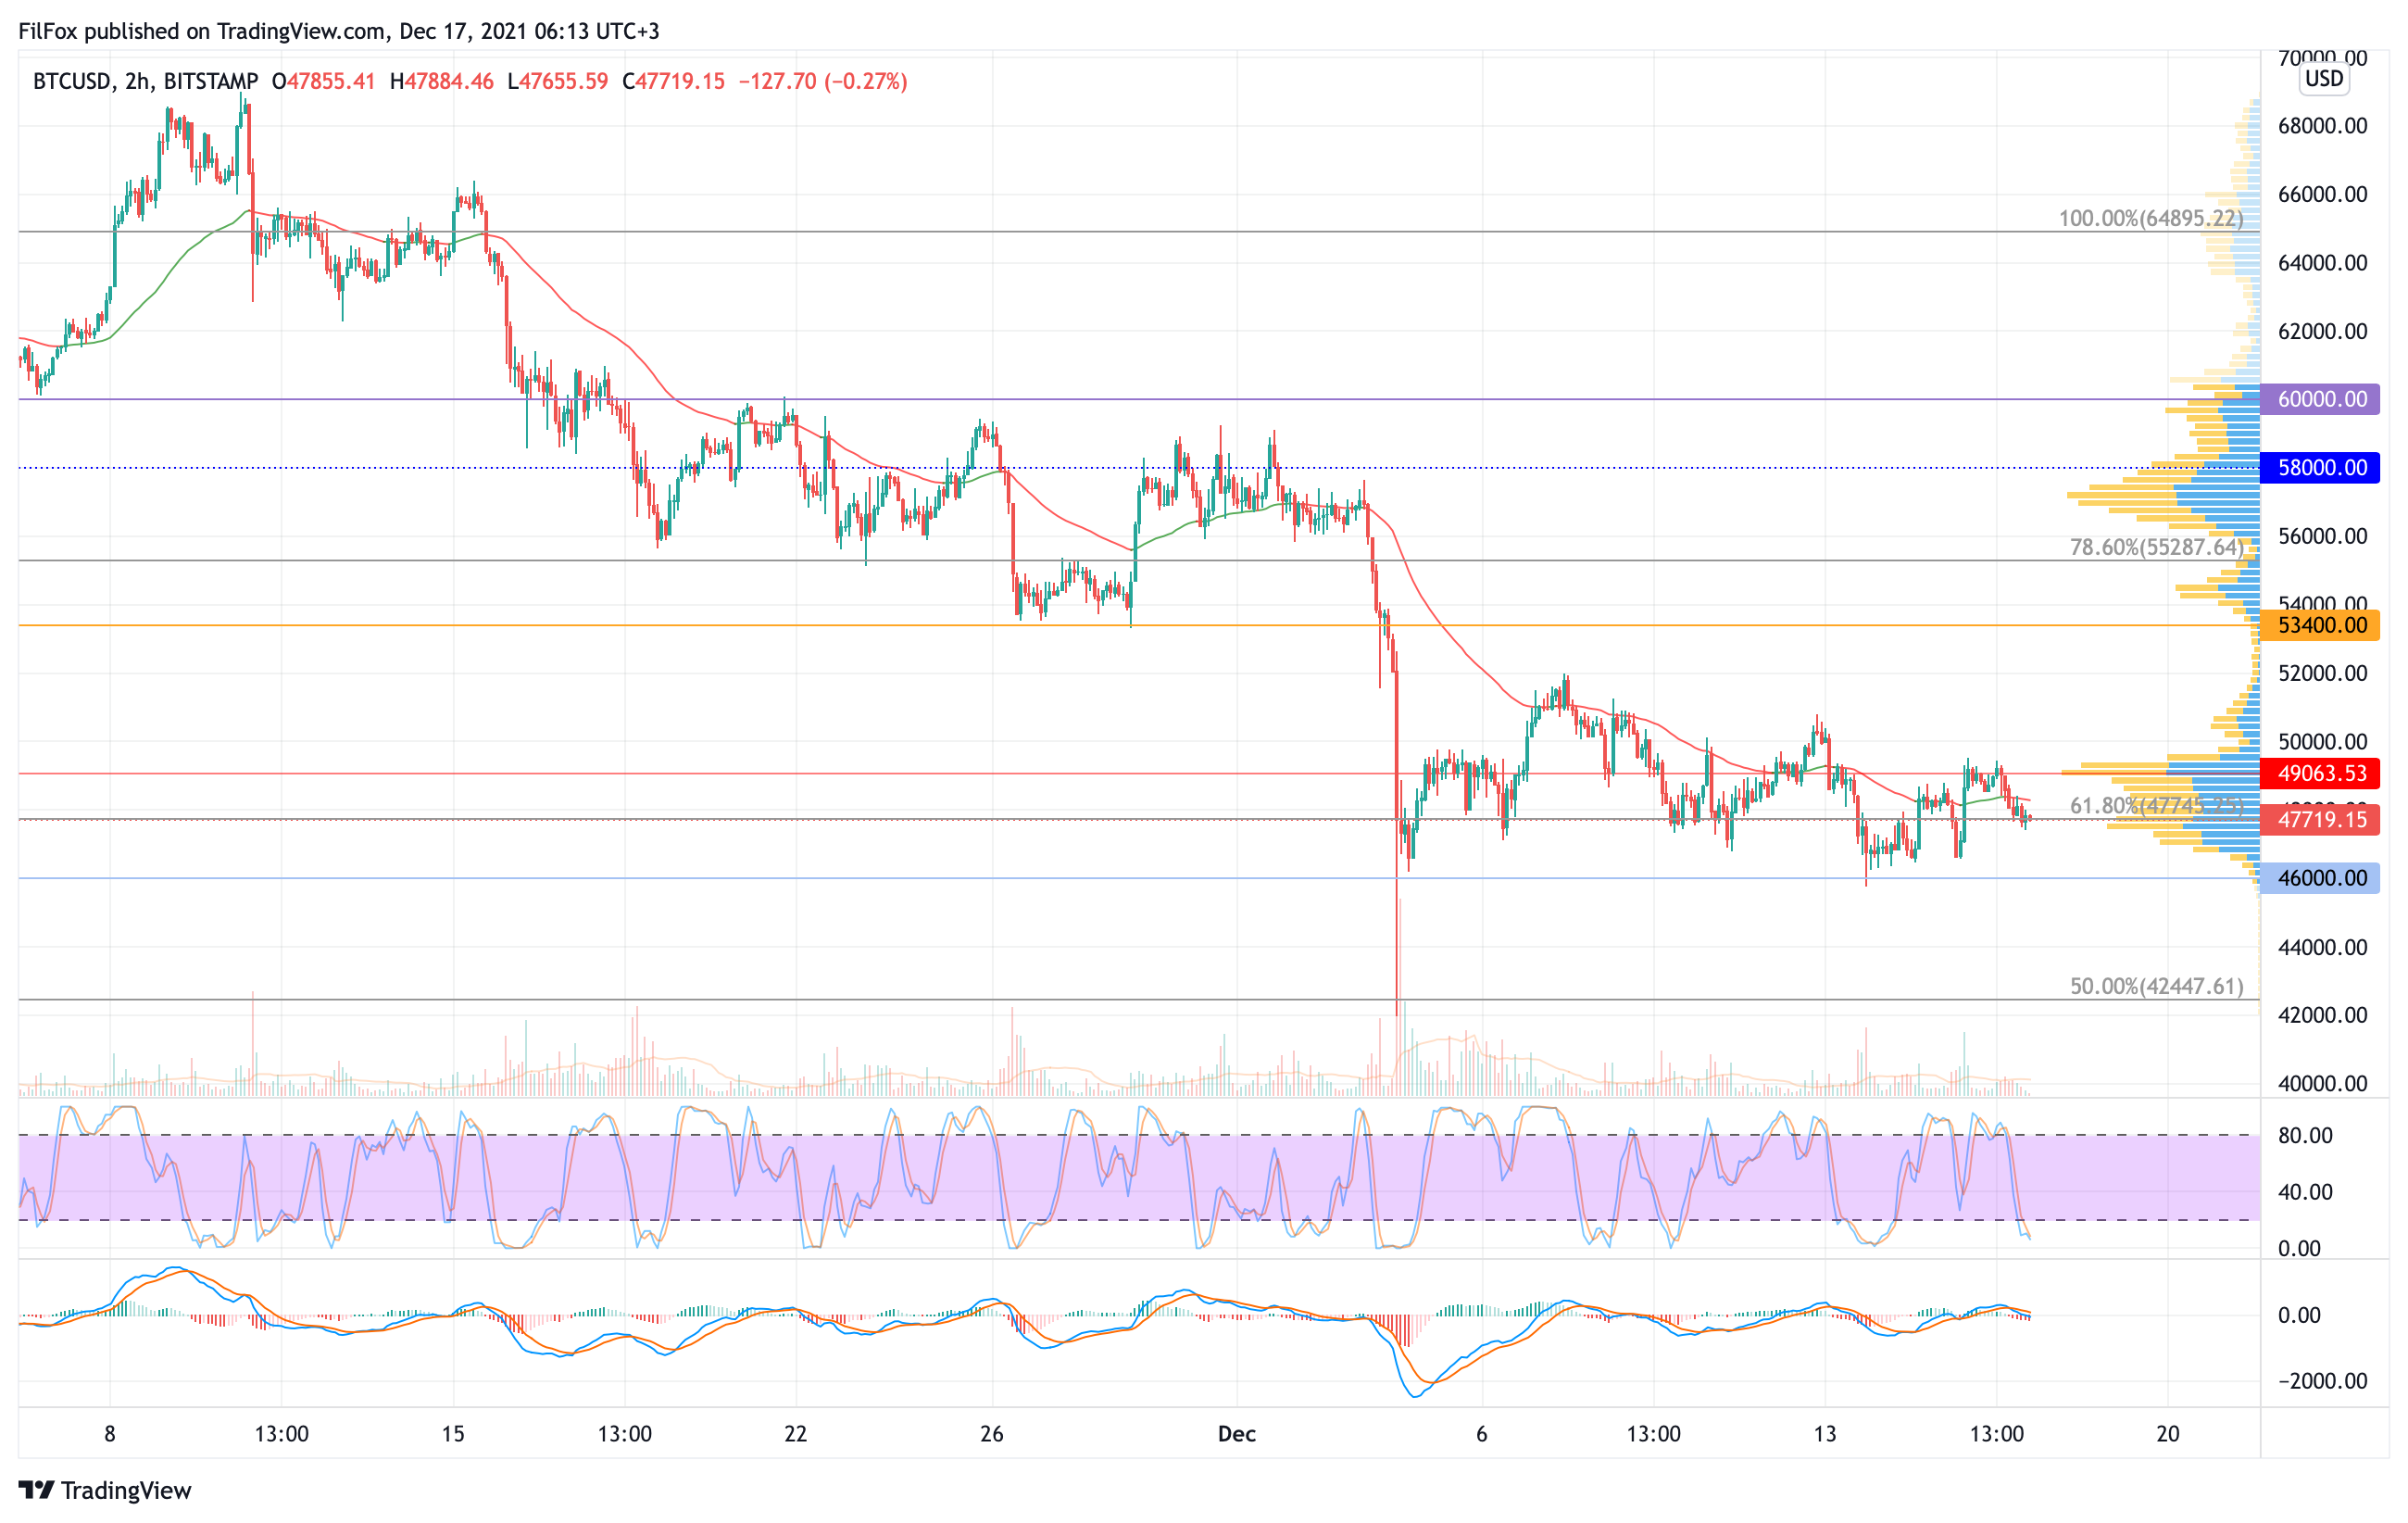 Analysis of the prices of Bitcoin, Ethereum, XRP for 12/17/2021